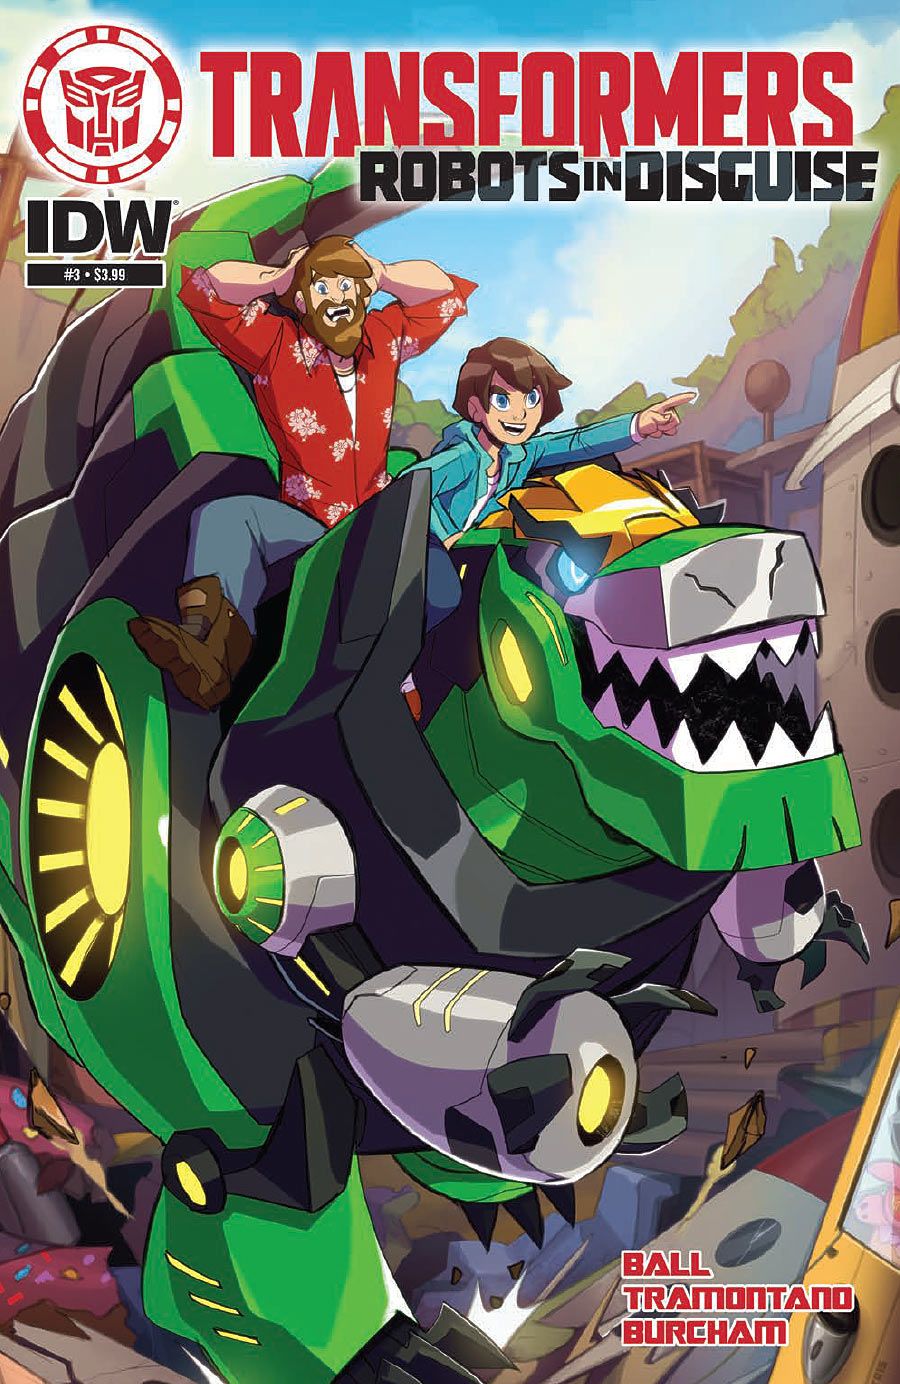 Transformers: Robots in Disguise Animated #3